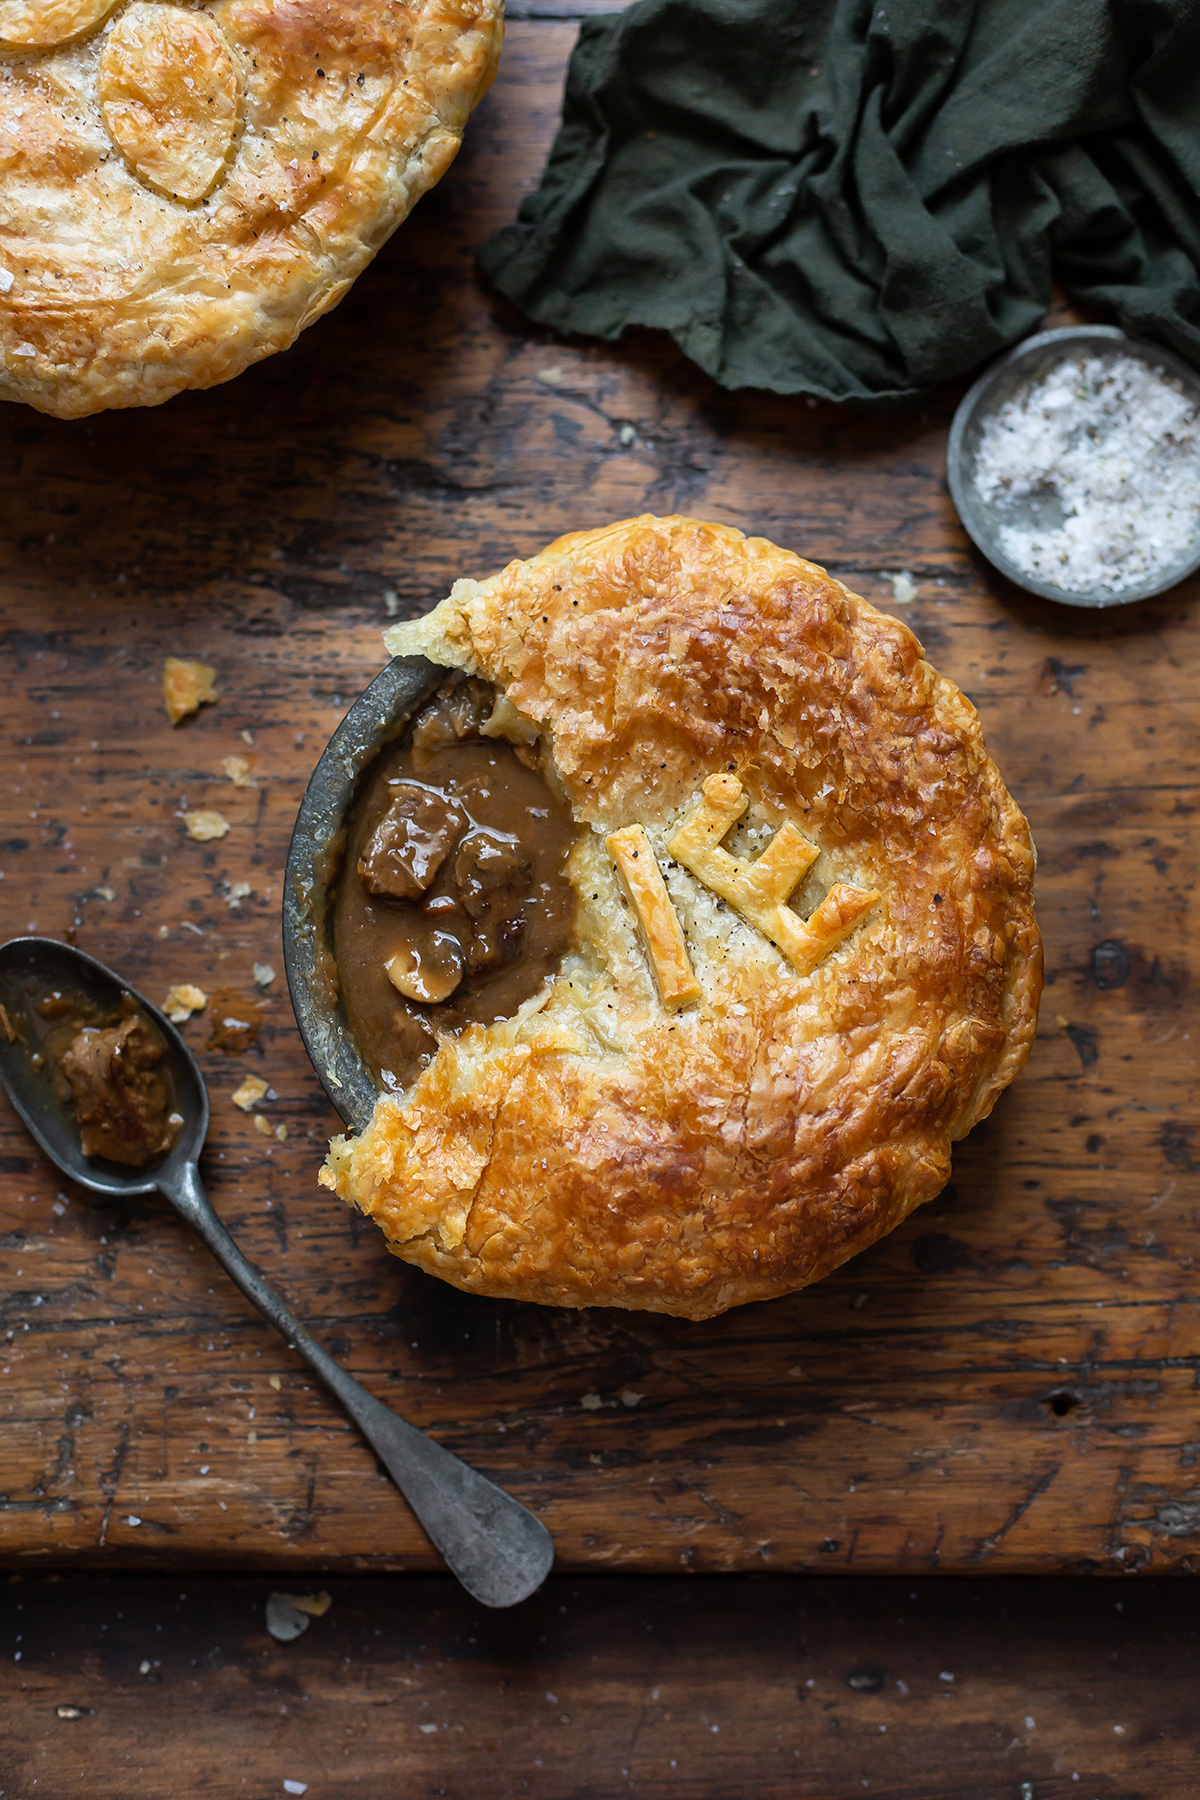 A classic beef and mushroom pie with ale